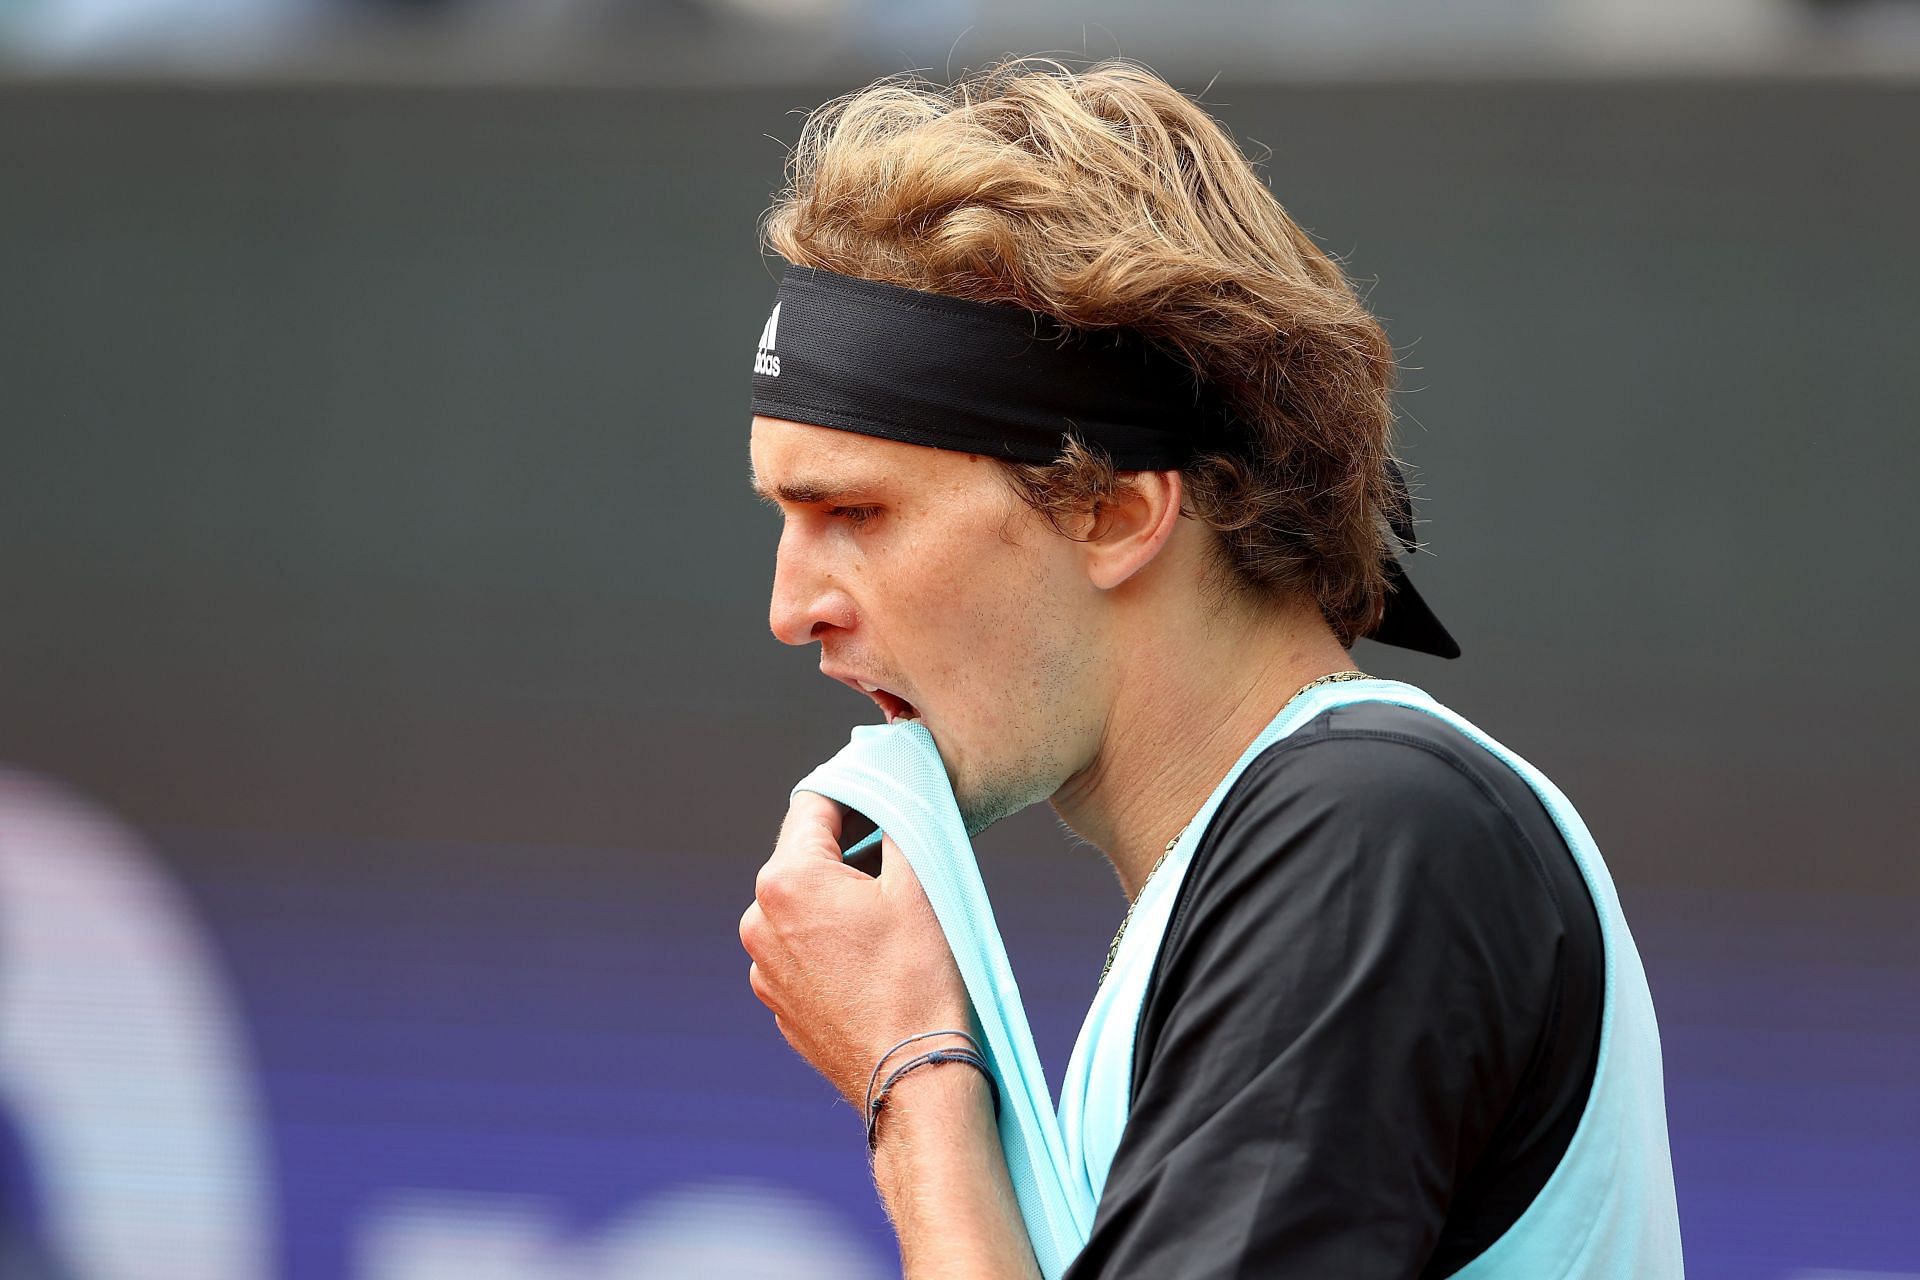 Alexander Zverev said that there were no excuses for his performance against Rune